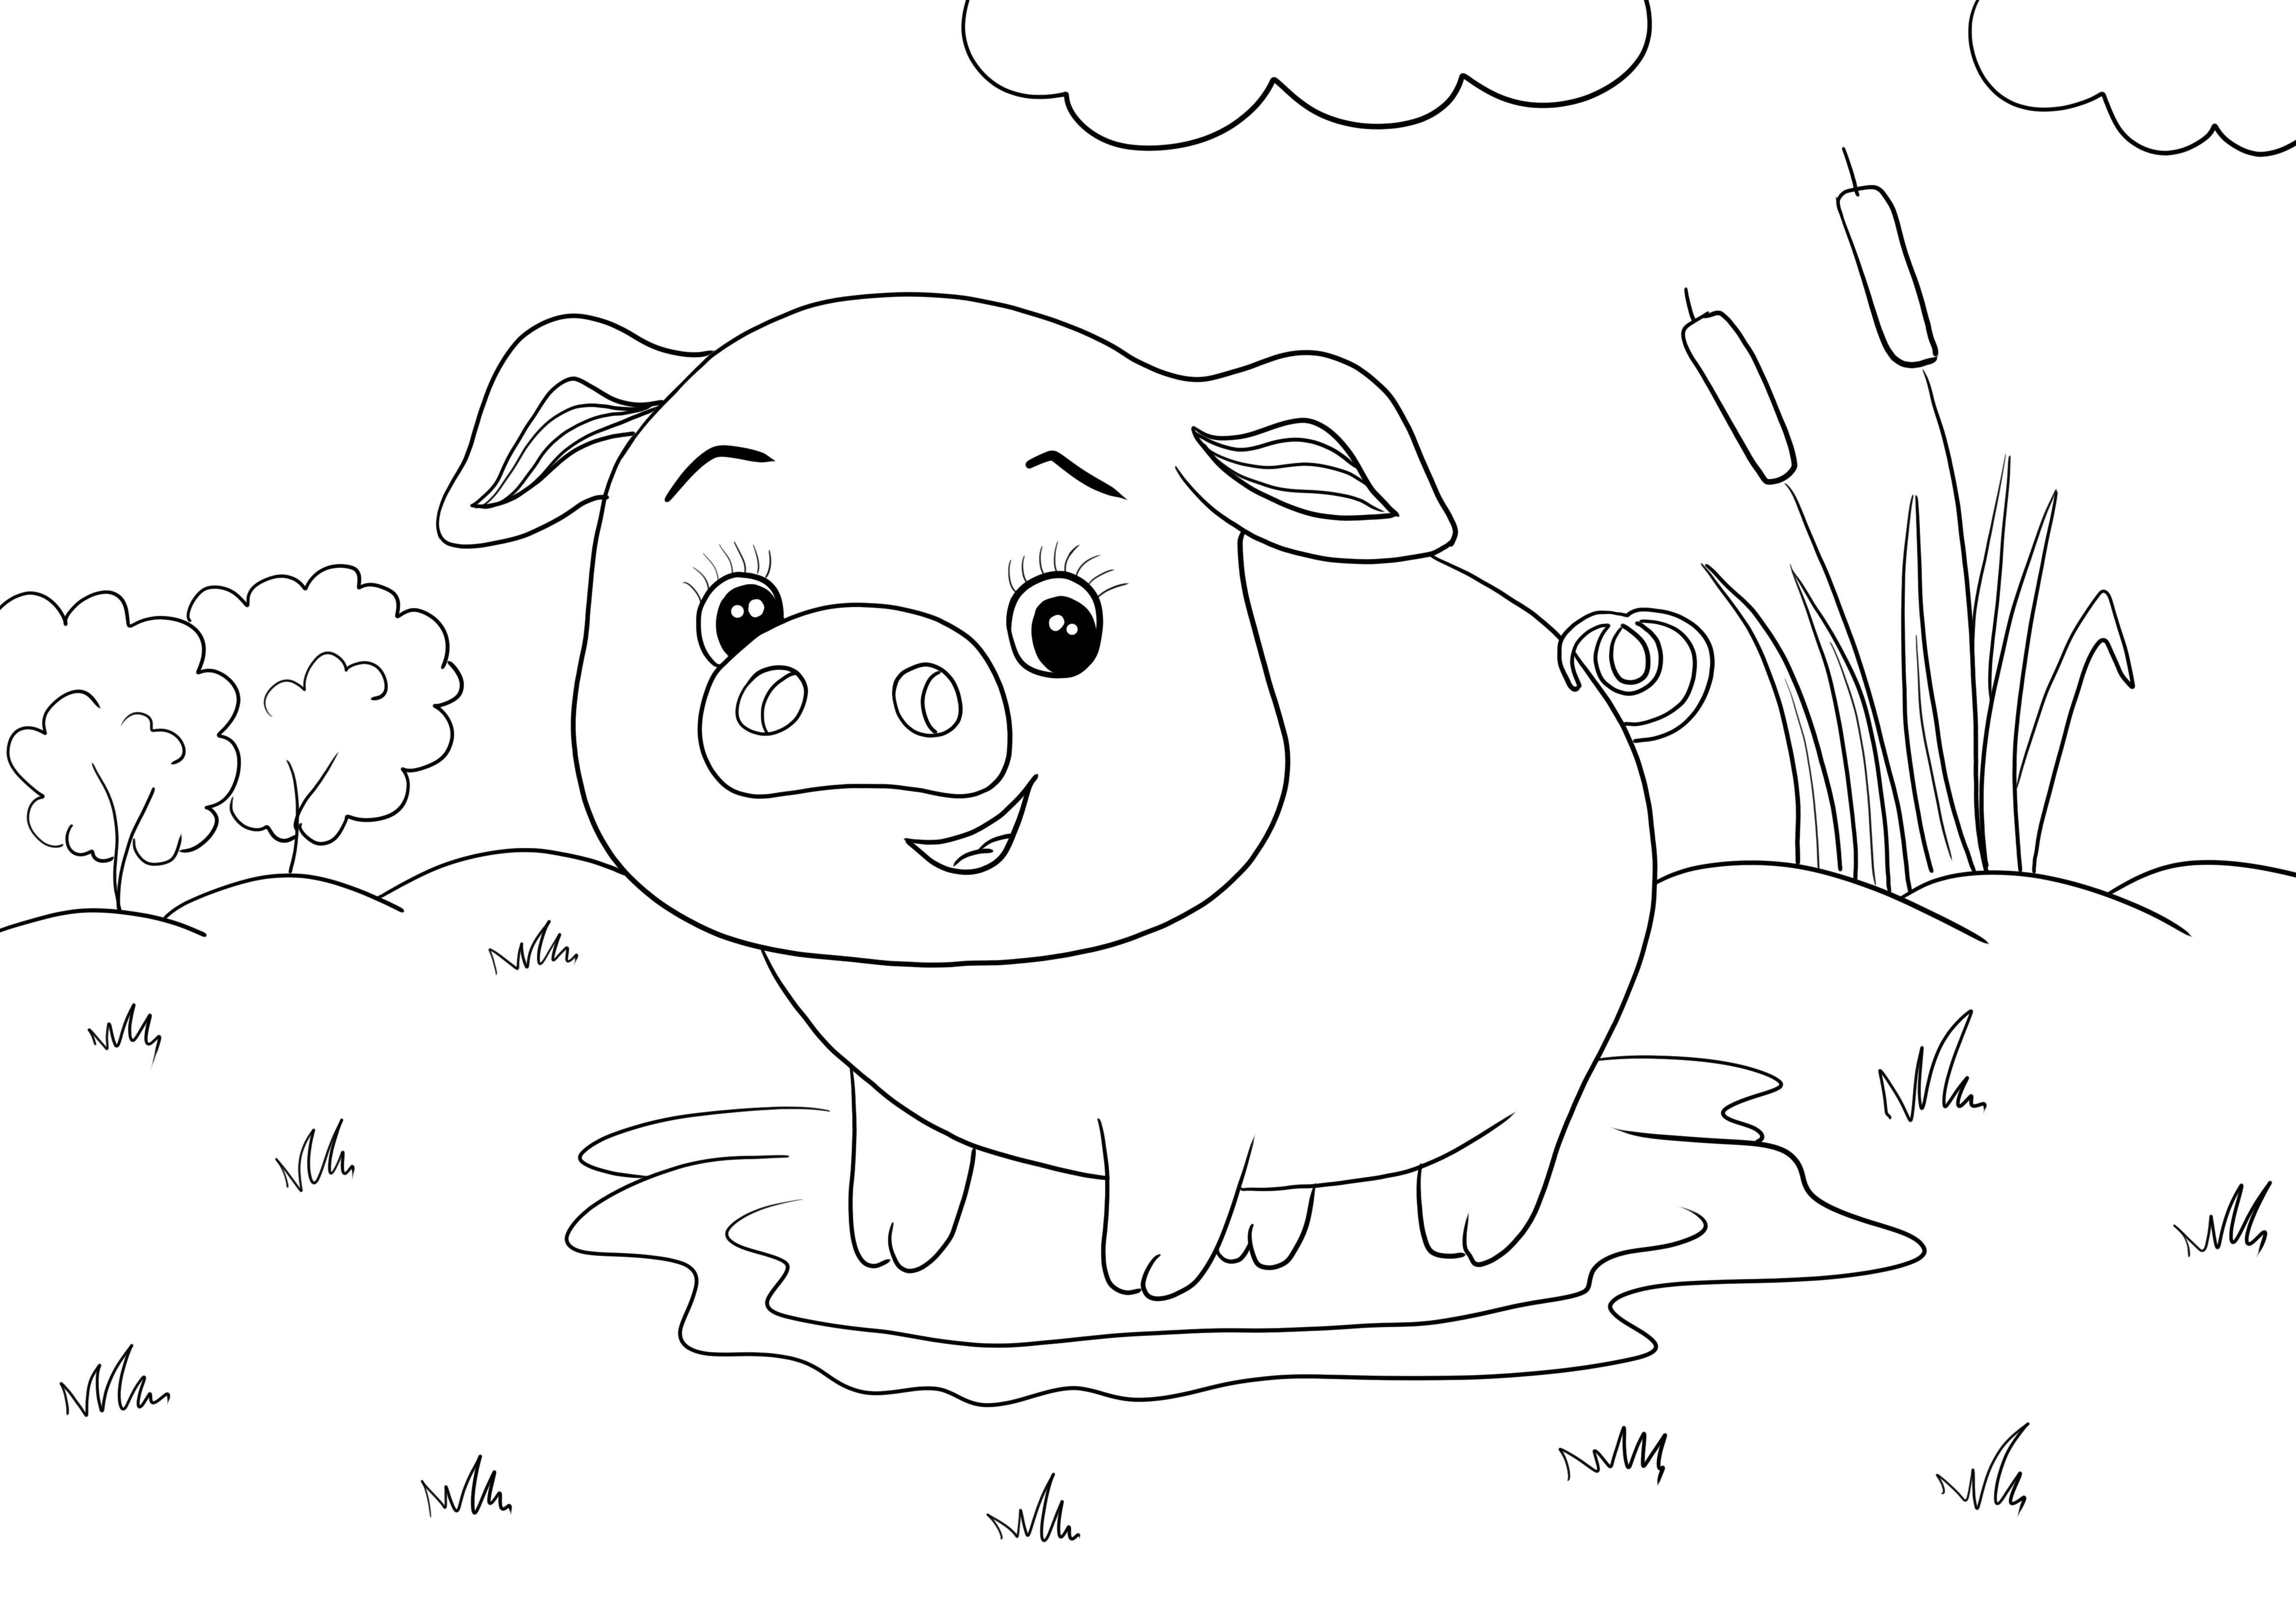 Little piglet in a puddle free printable image to color